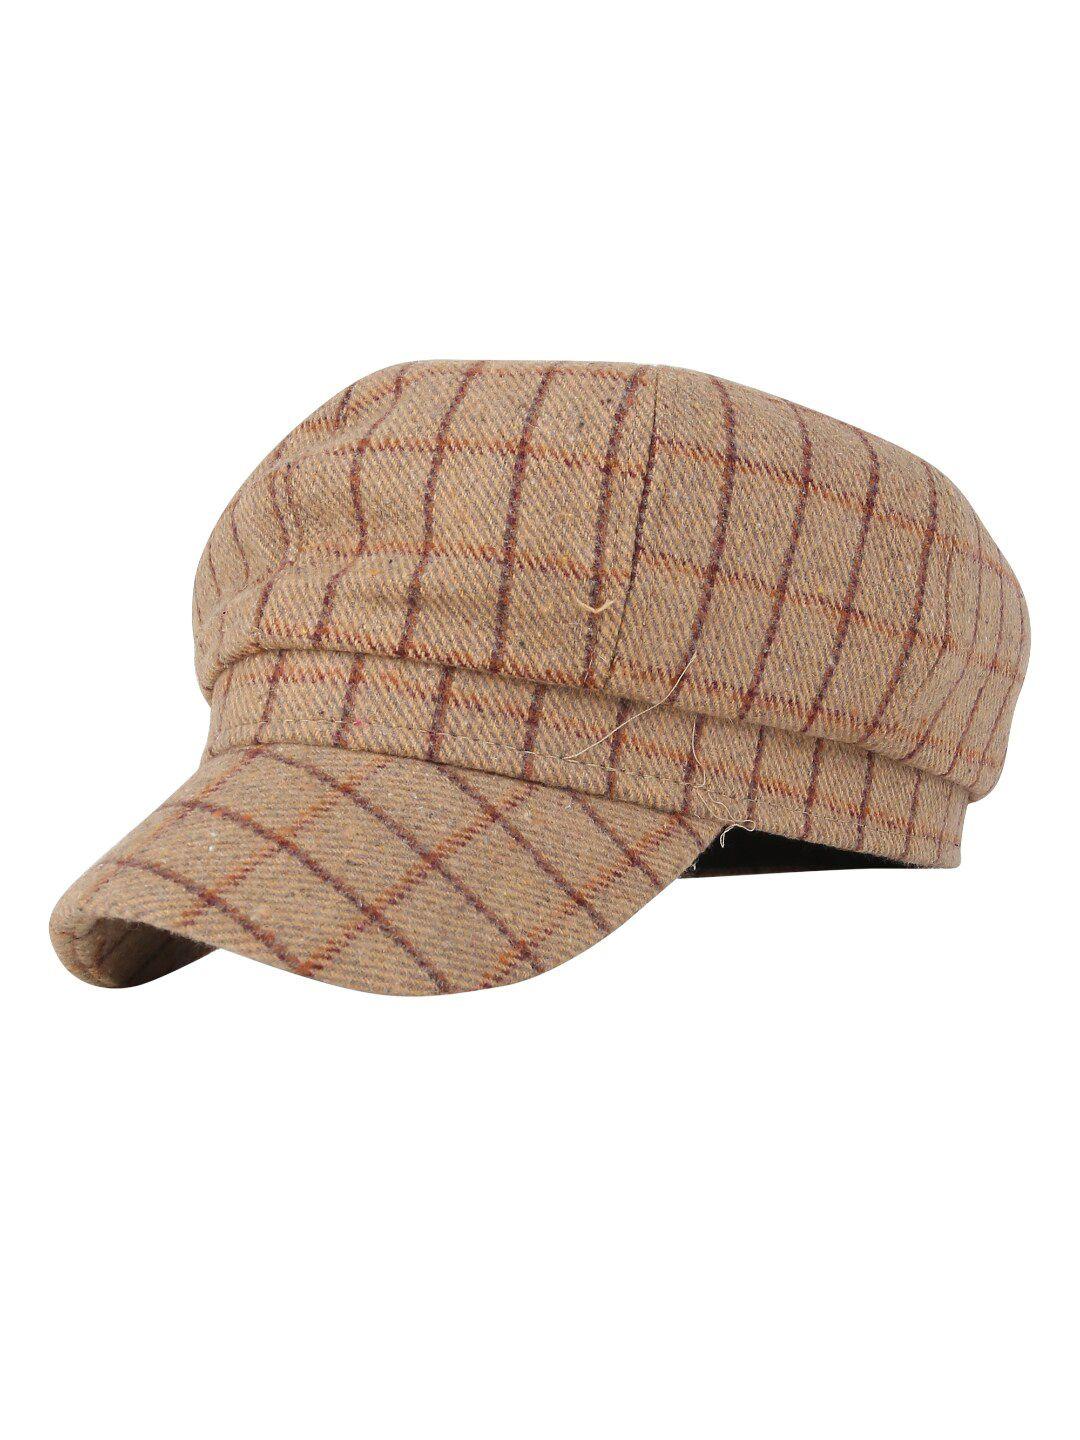 isweven unisex brown checked cotton ascot cap